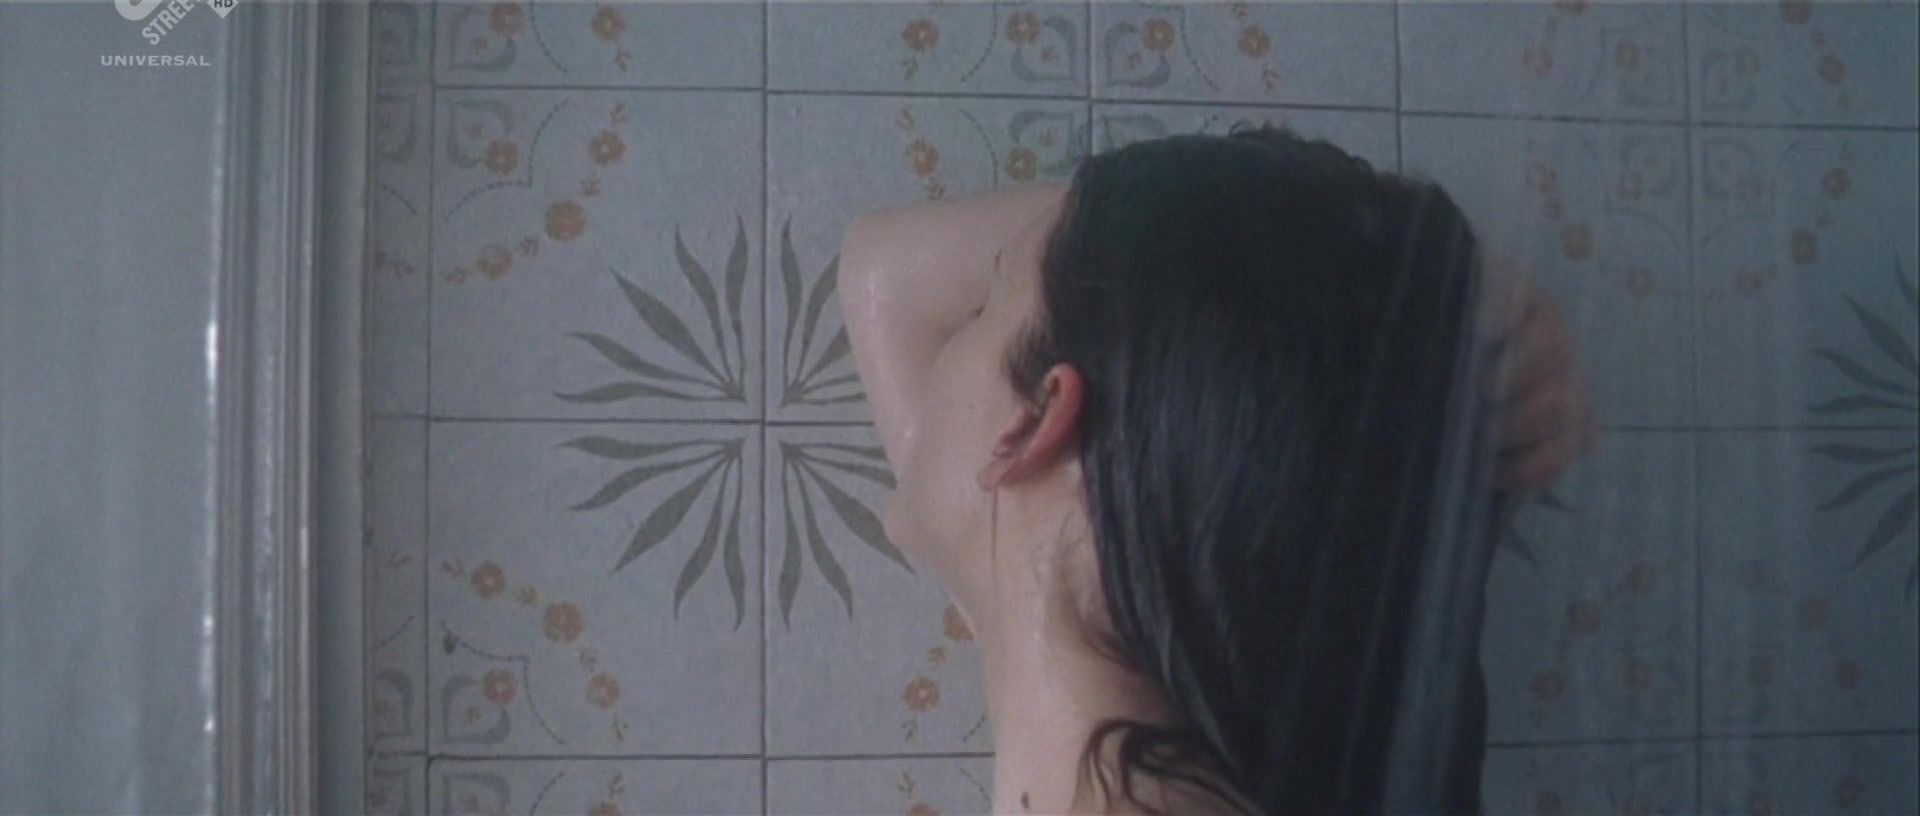 FullRips Topless Melanie Laurent from Shower Video of the French movie "La chambre des morts" HD